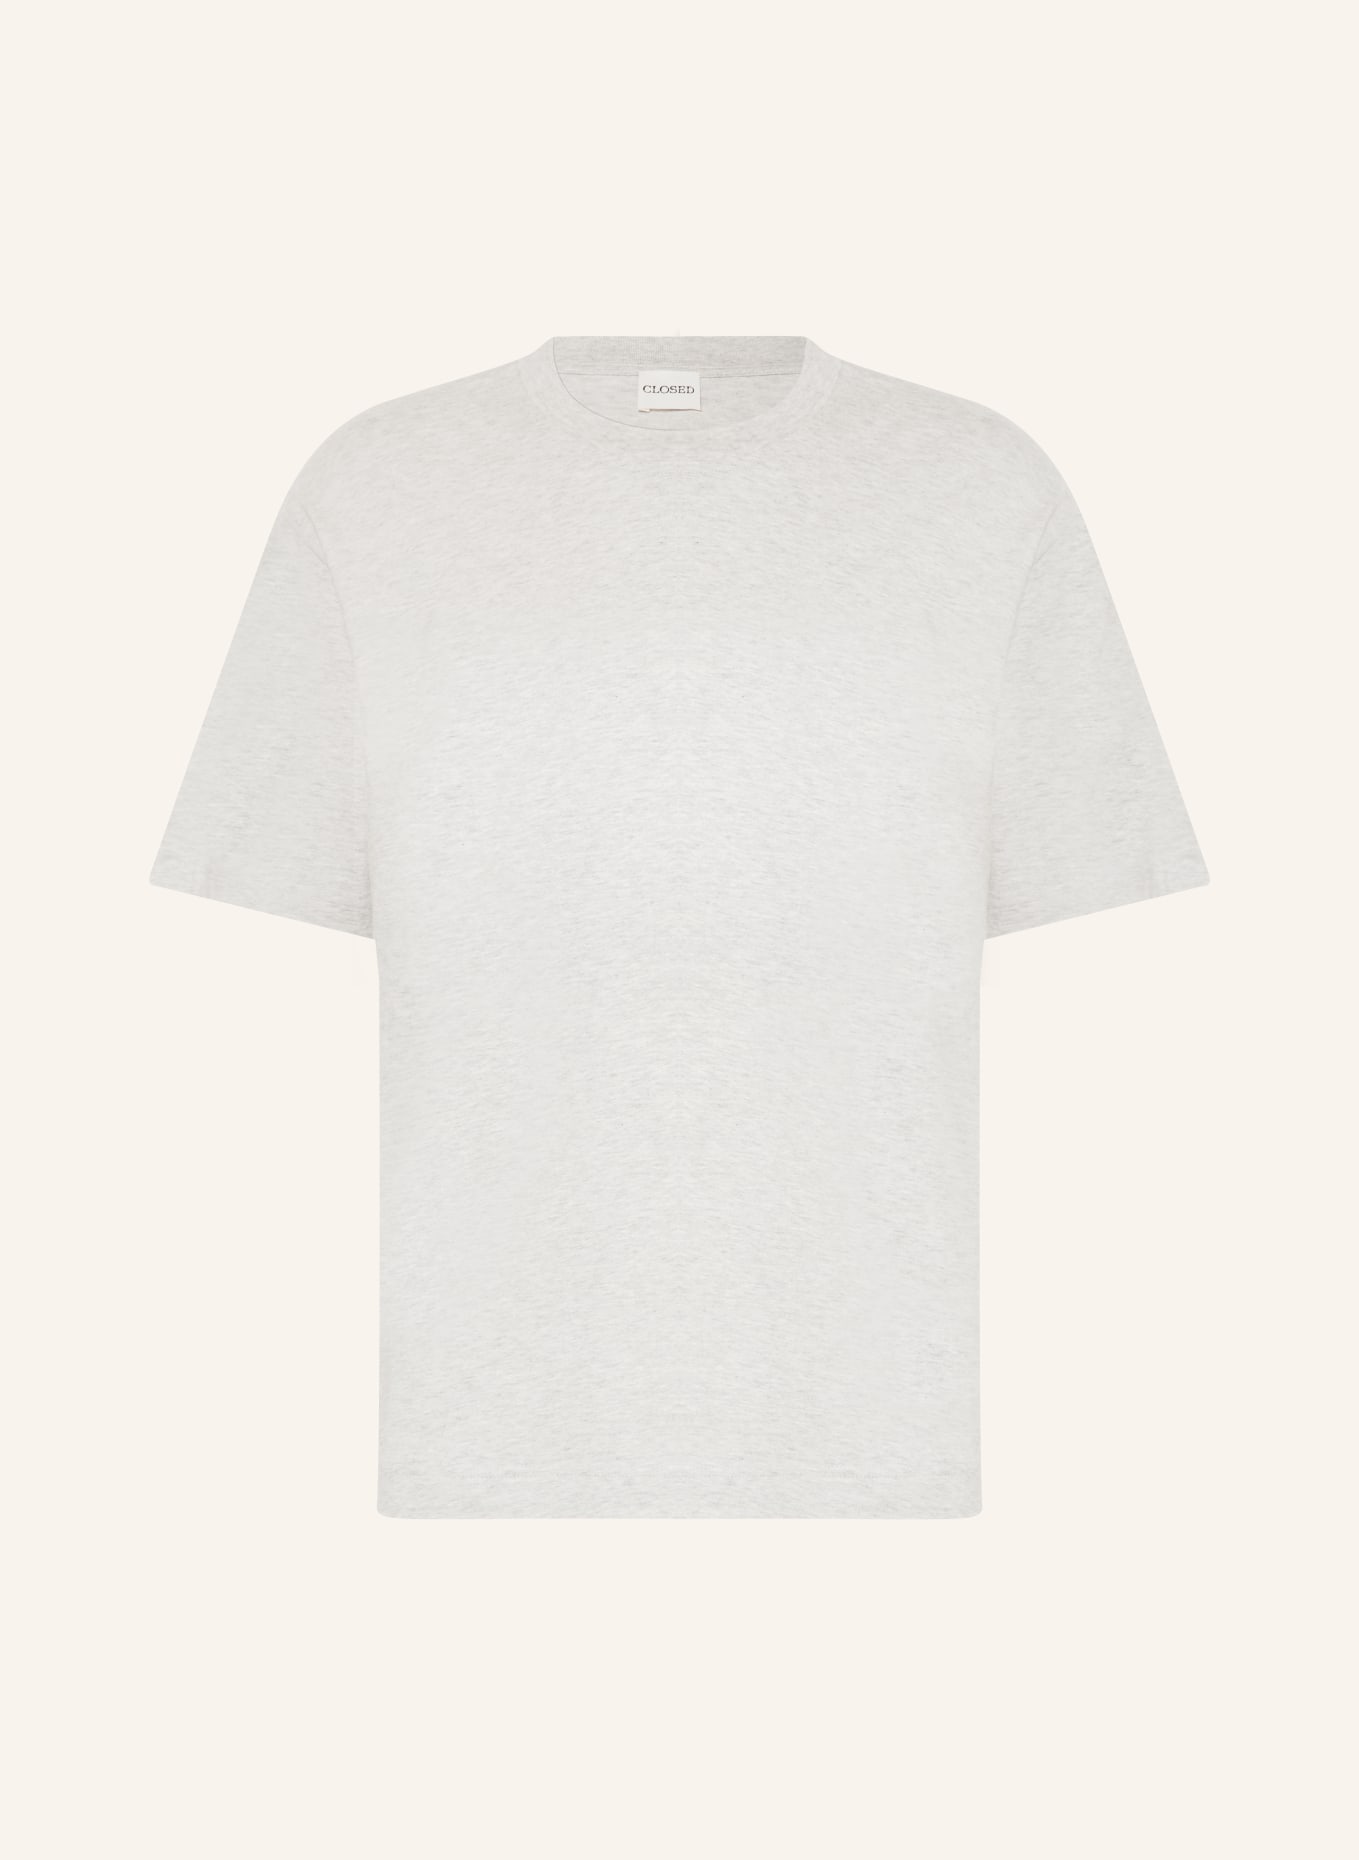 CLOSED T-shirt, Color: GRAY (Image 1)